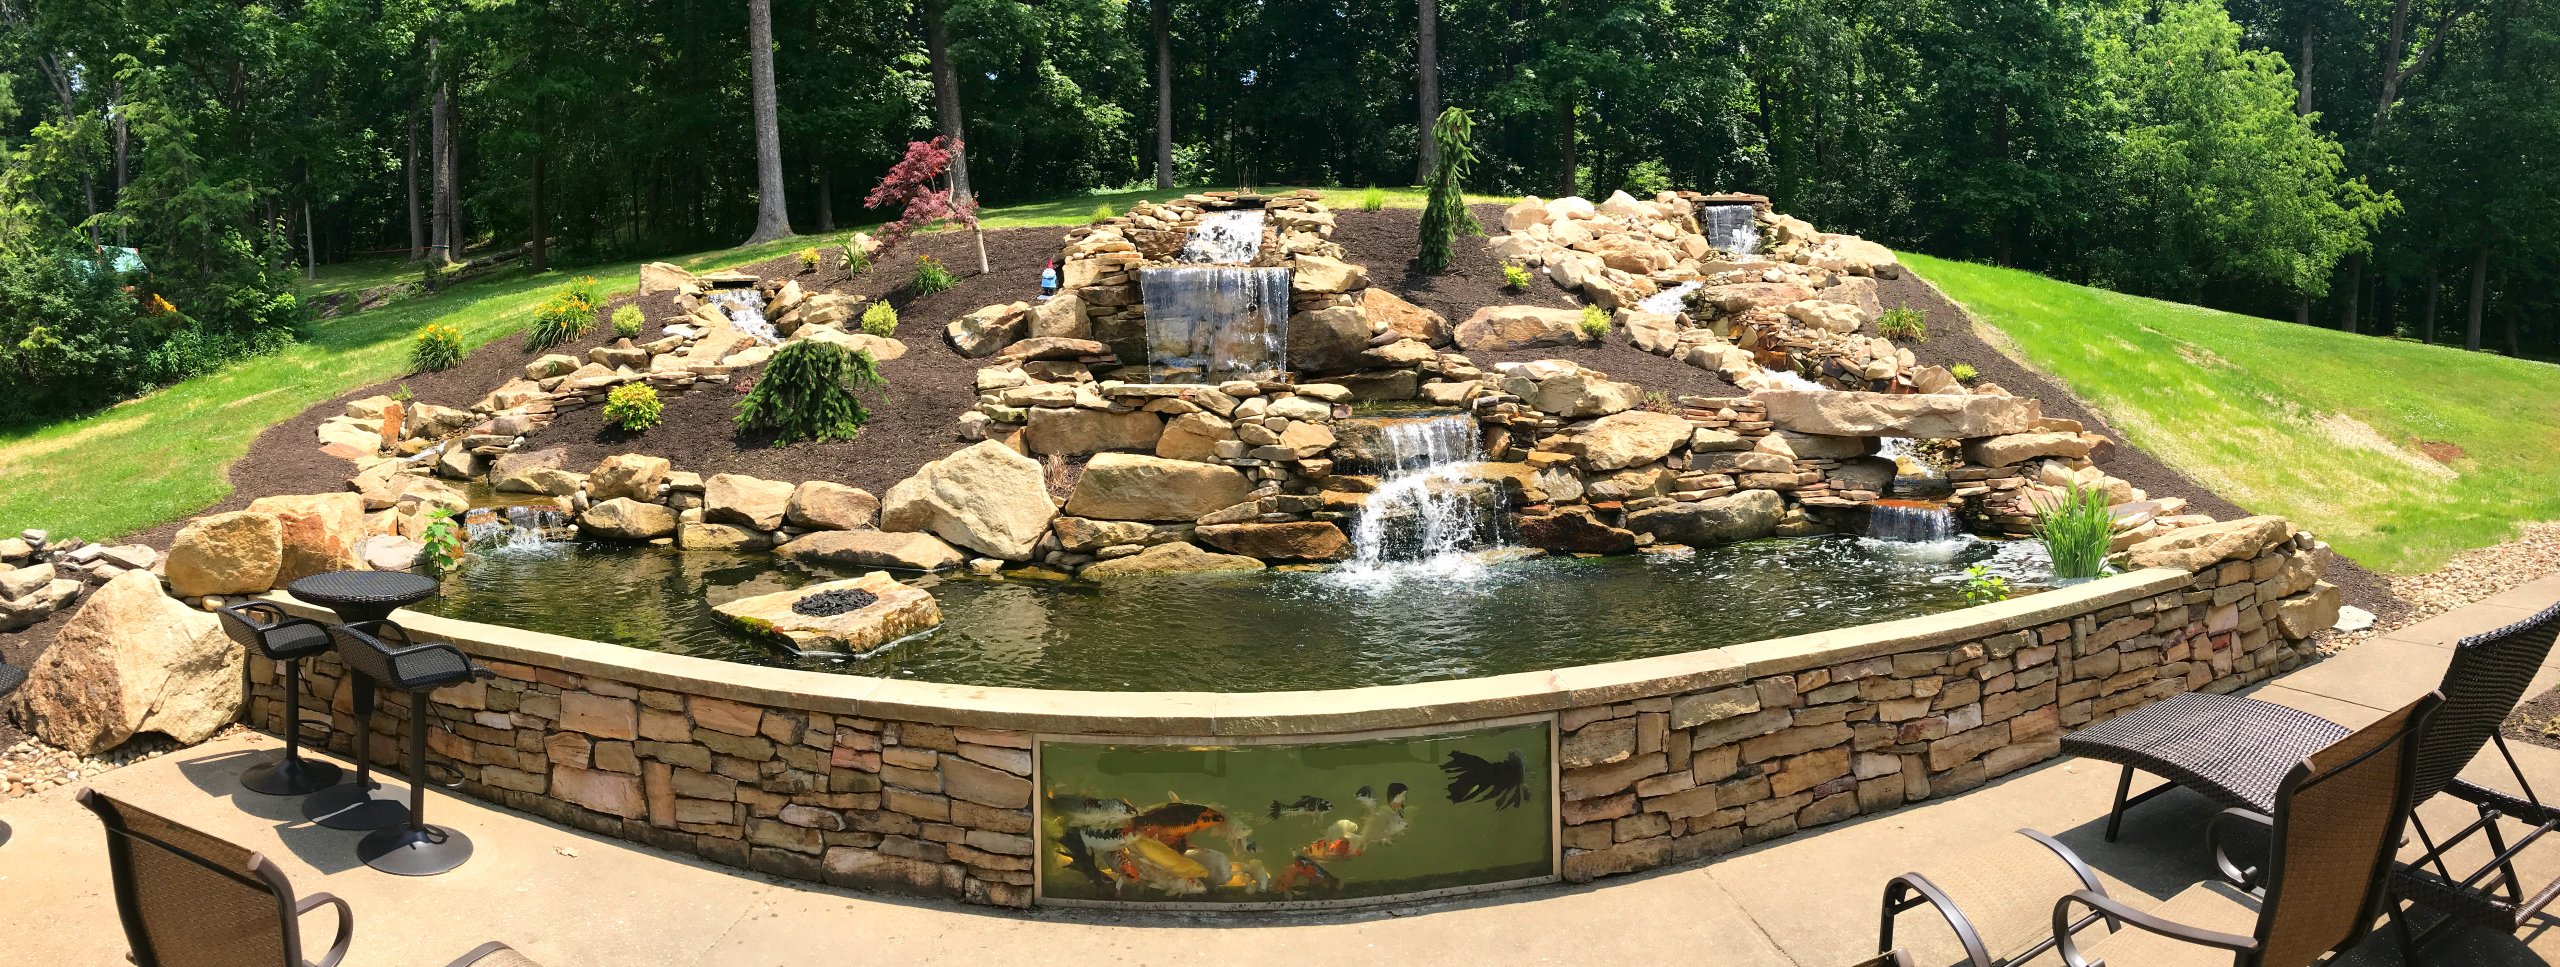 Creating Tranquil Water Features using Great Stuff Pond & Stone